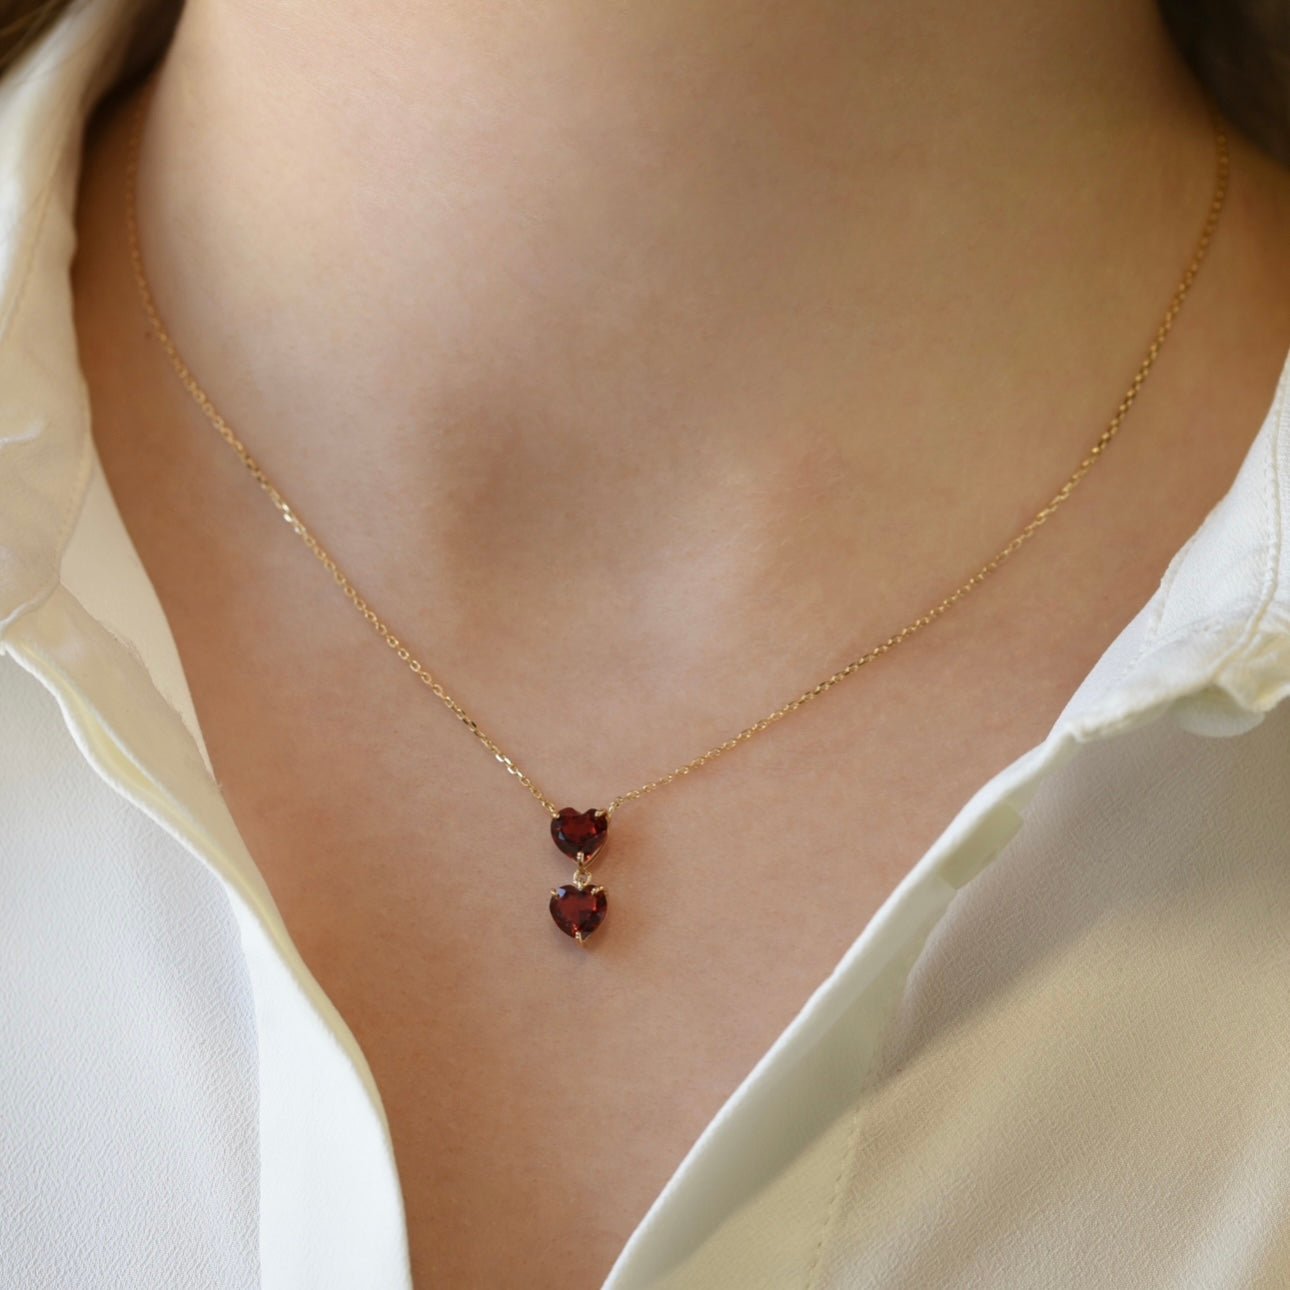 Double Hearts Necklace in Garnet - 18k Gold - Ly